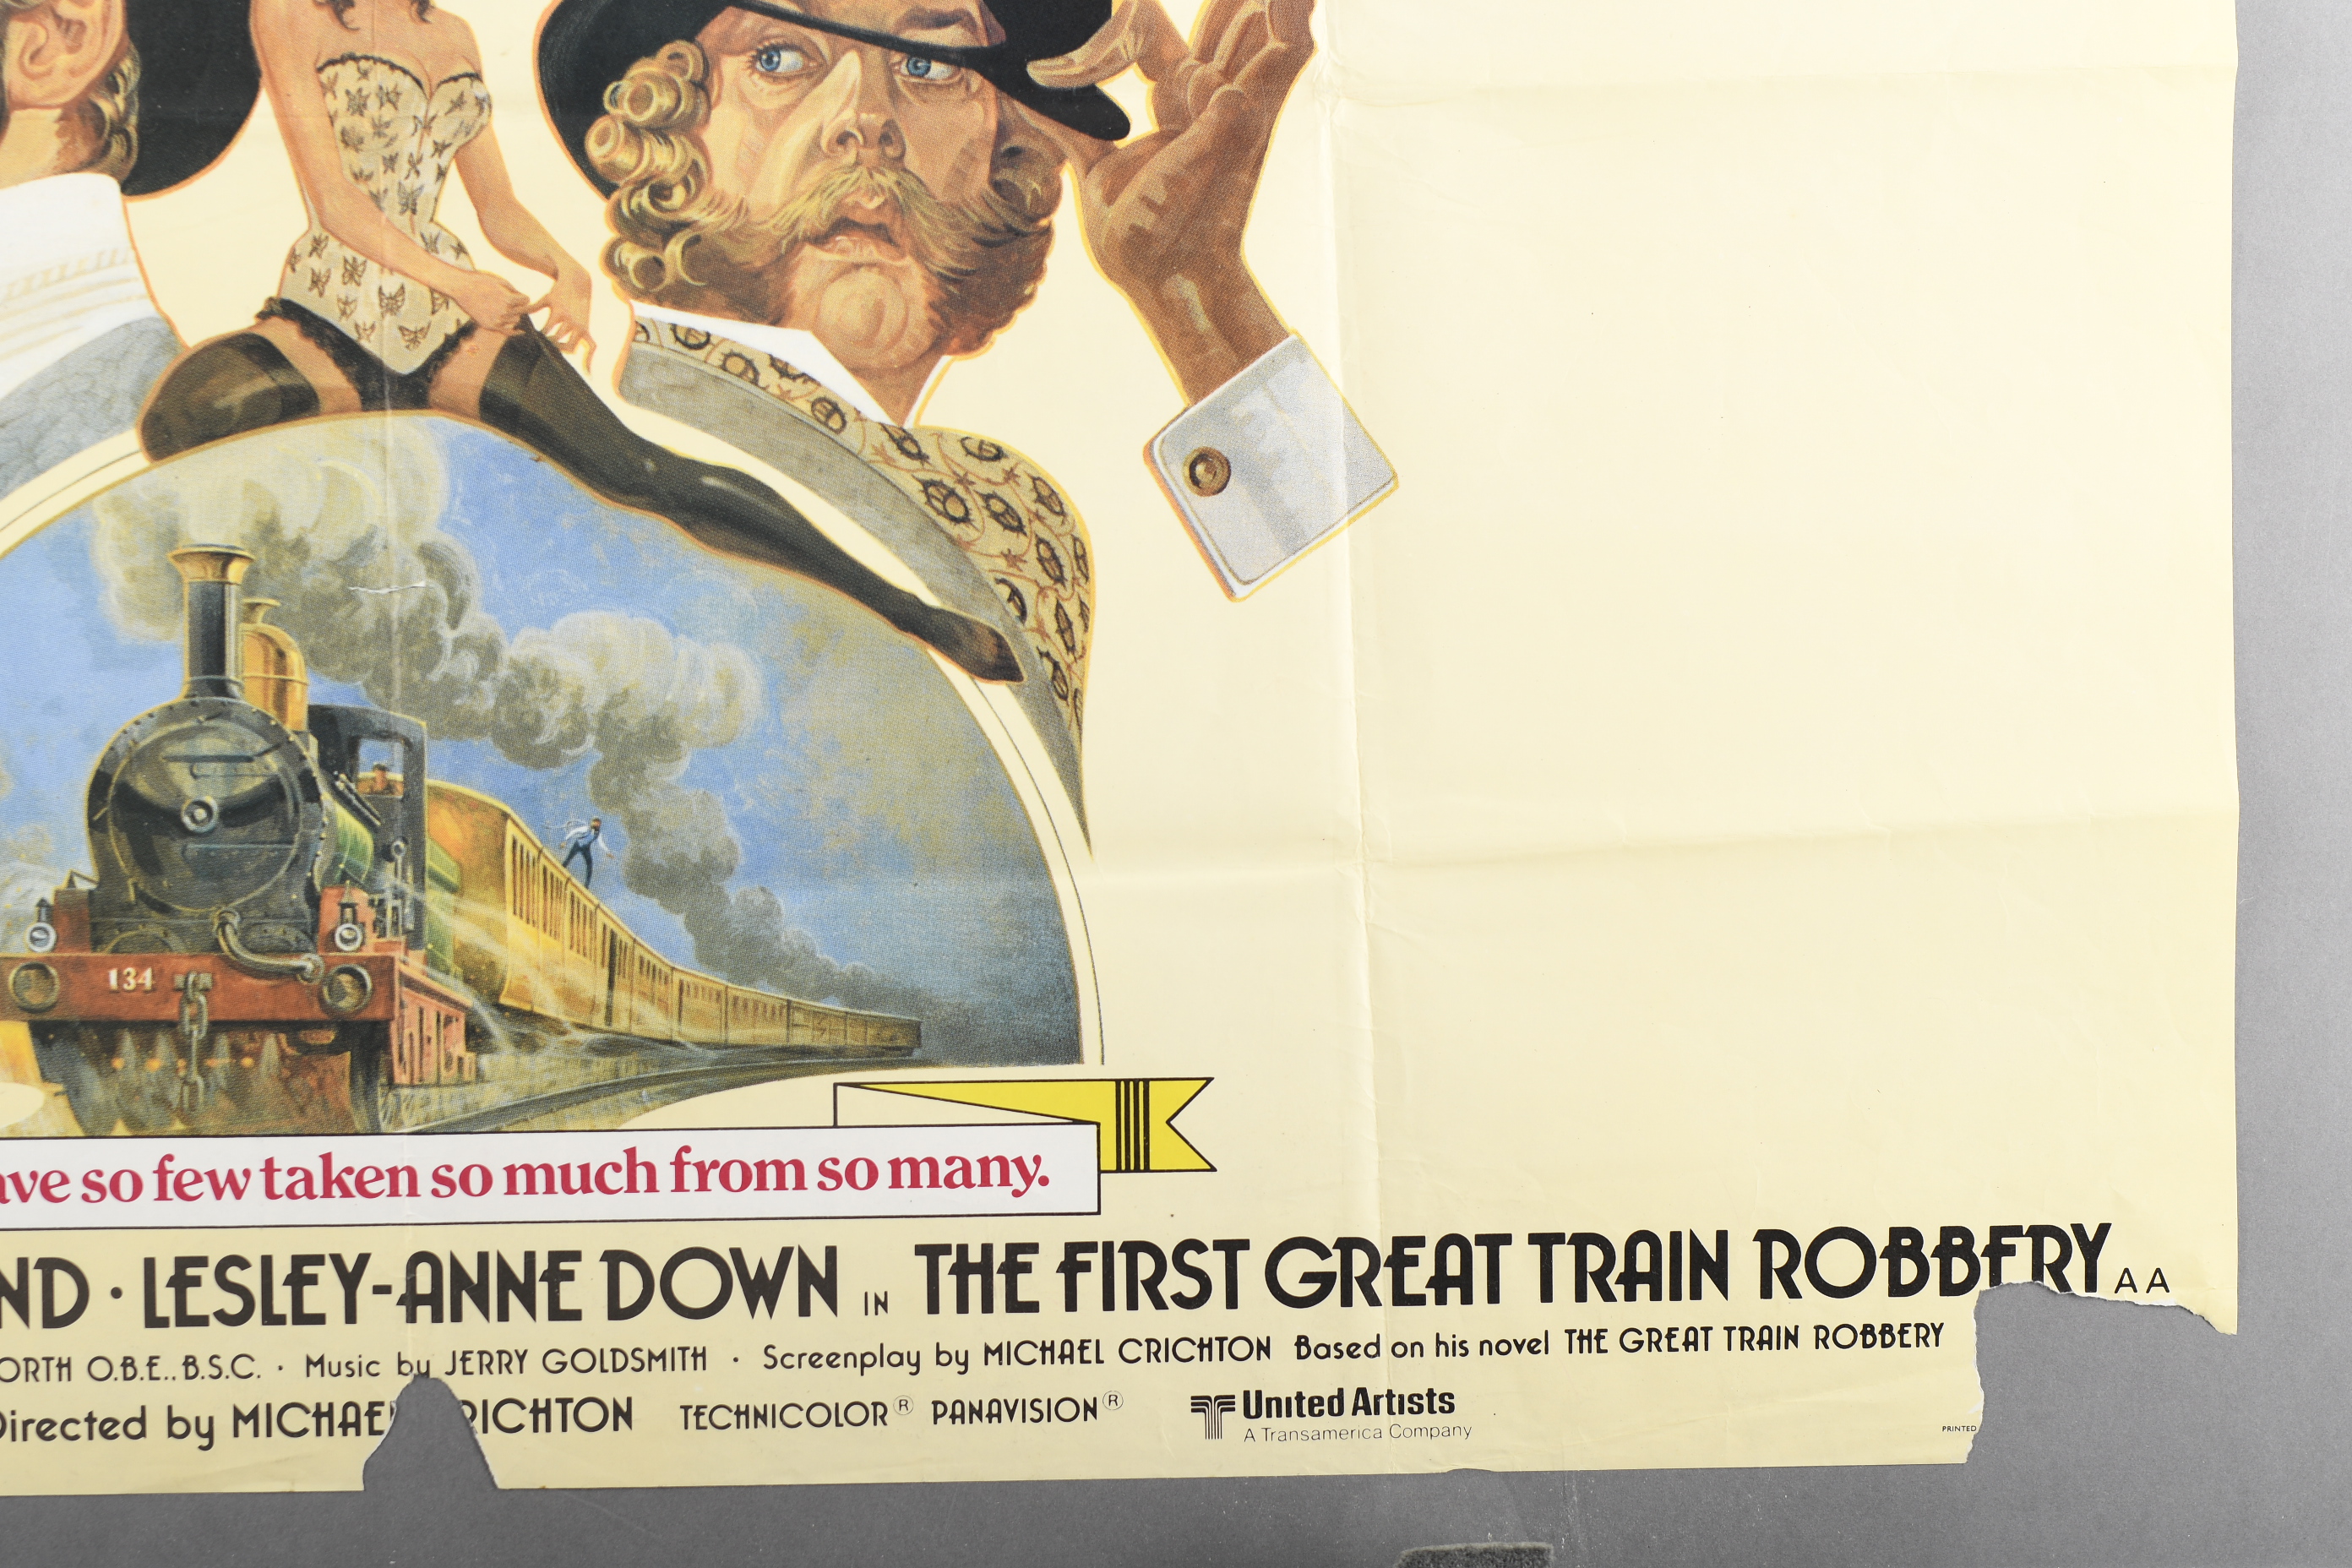 Original "The First Great Train Robbery" Film Poster - Image 7 of 7